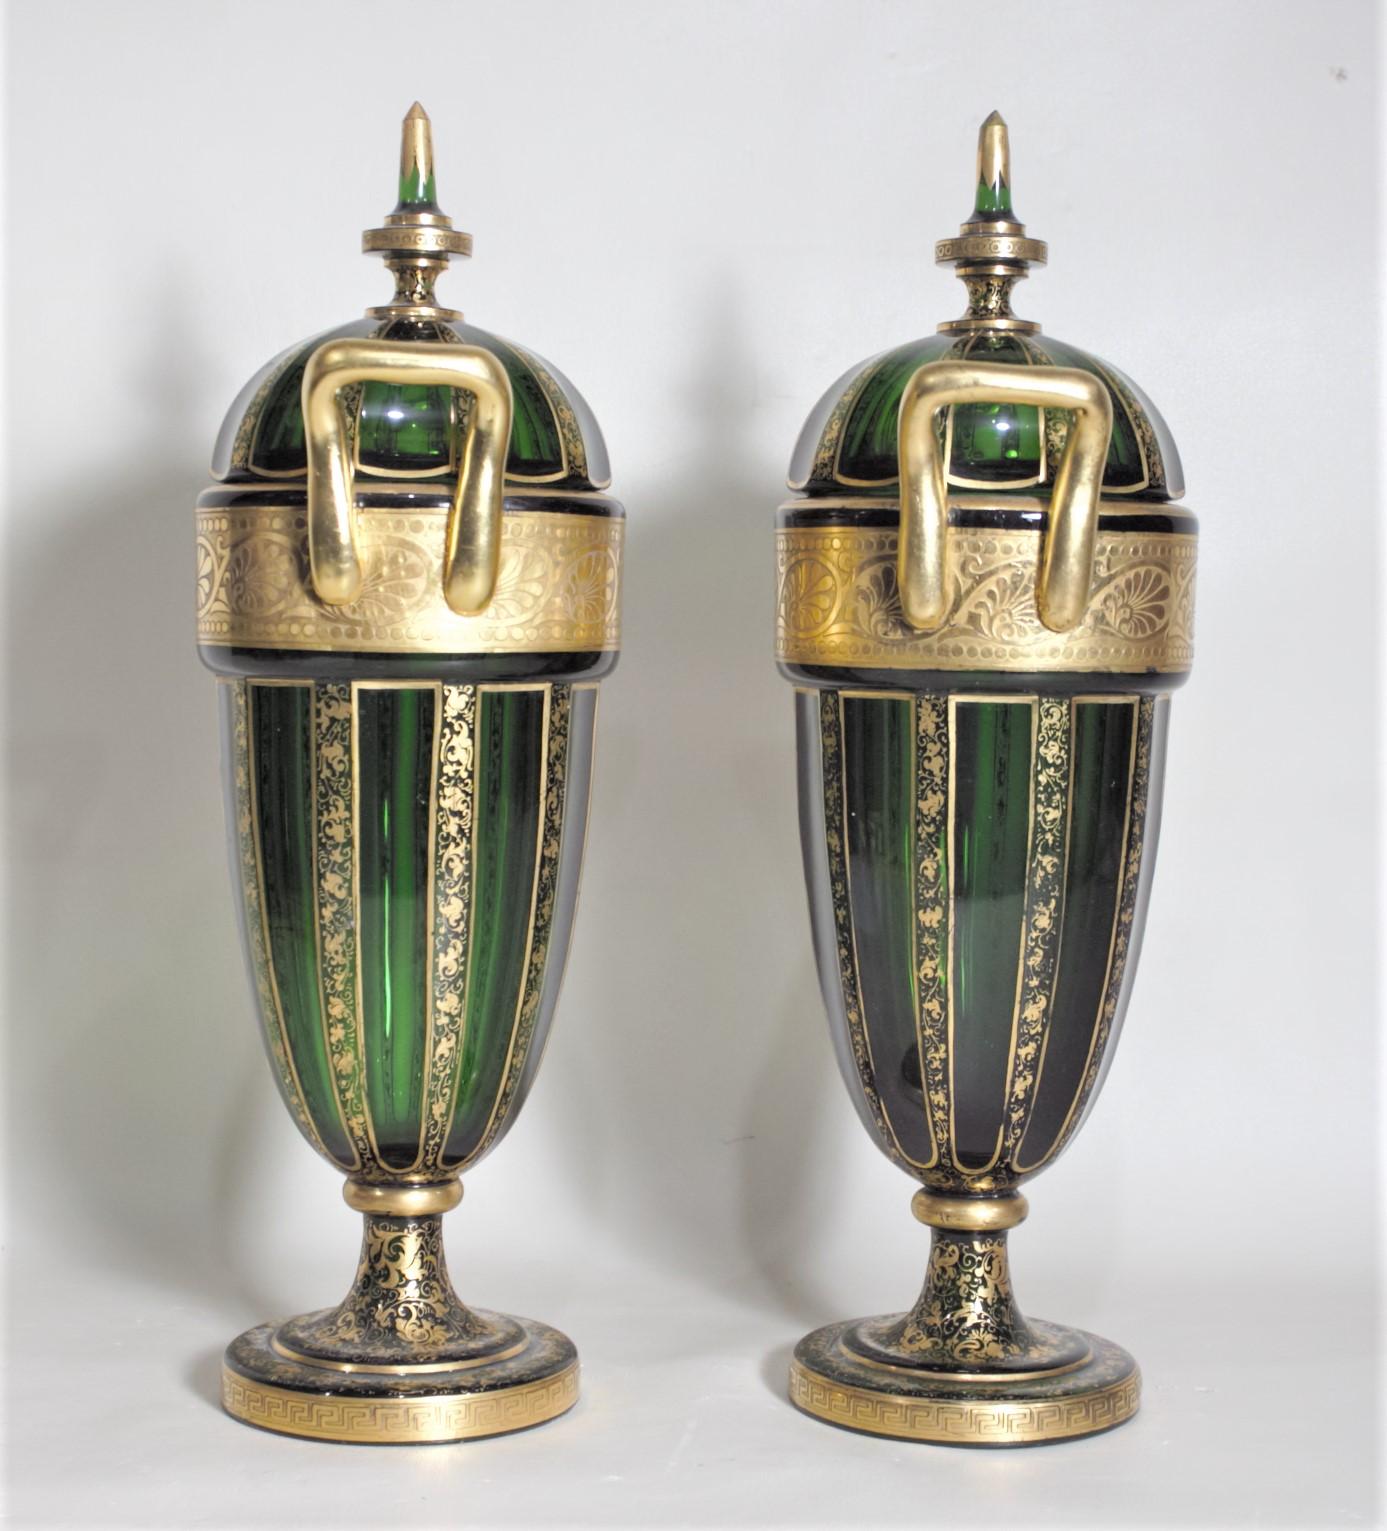 Pair of Antique Green Bohemian Covered Glass Urns with Heavy Gilt Decoration In Distressed Condition For Sale In Hamilton, Ontario